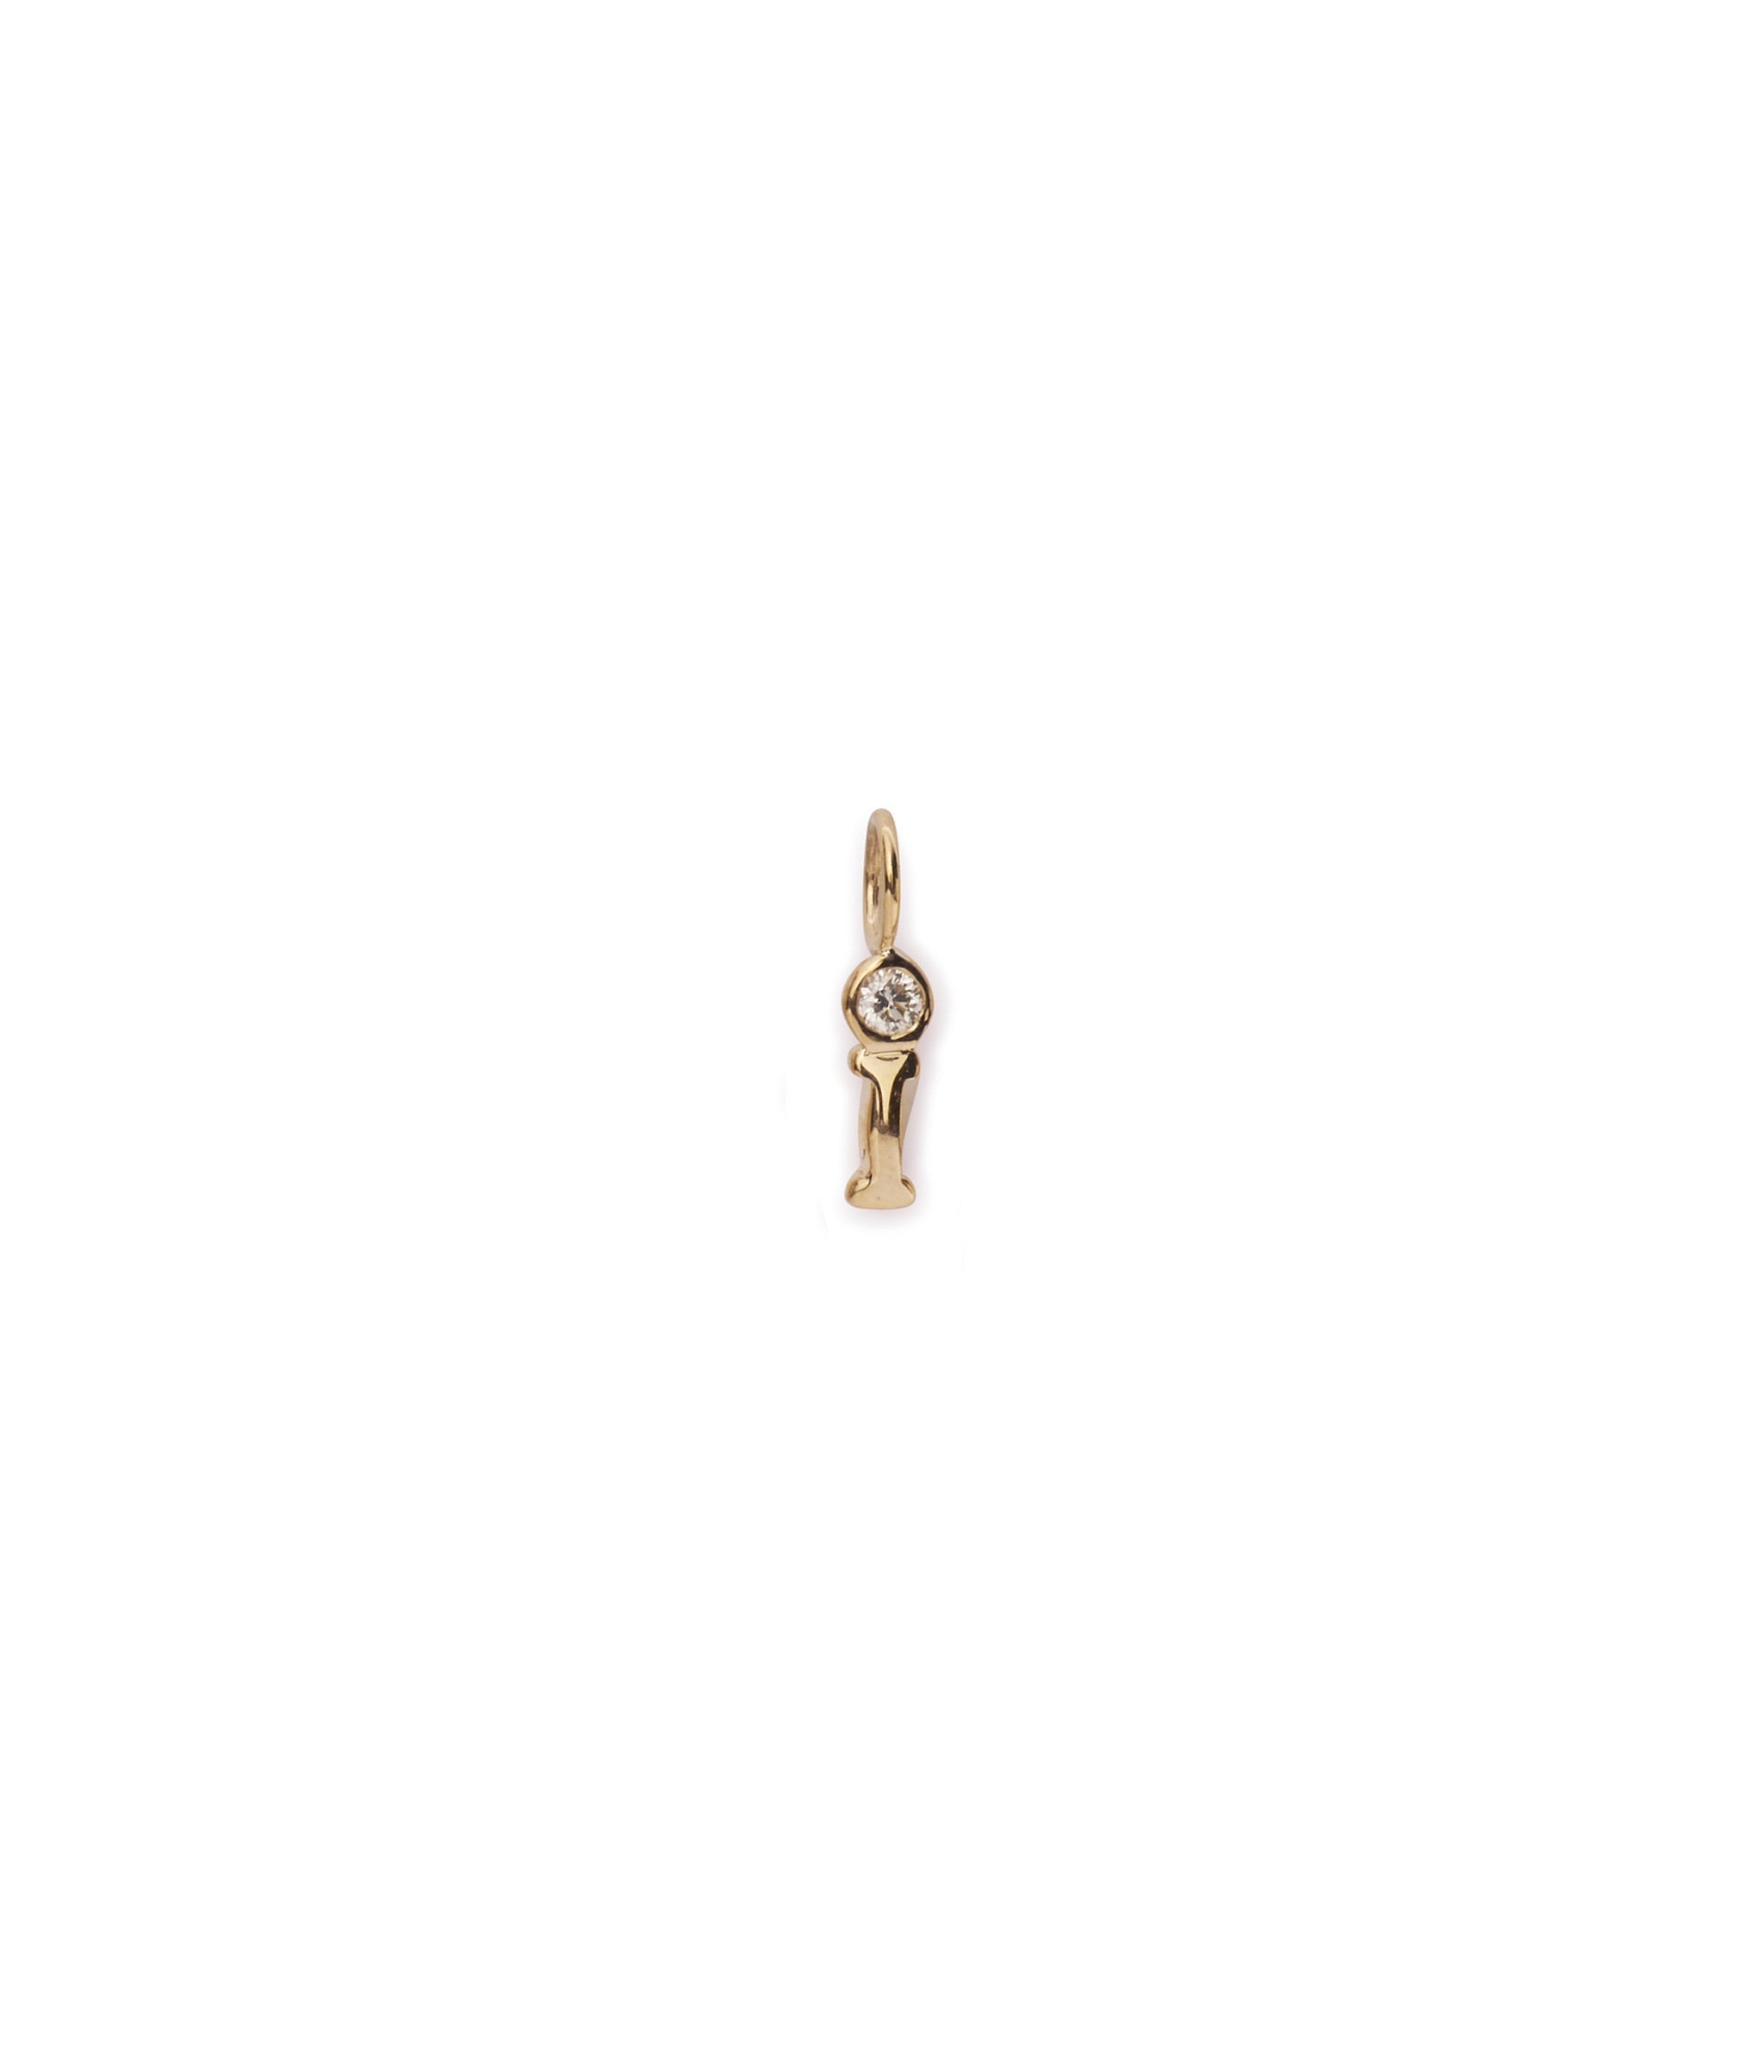 Alphabet Soup "I" Charm. Puffy mini 14k gold letter "I" charm with round diamond accent.